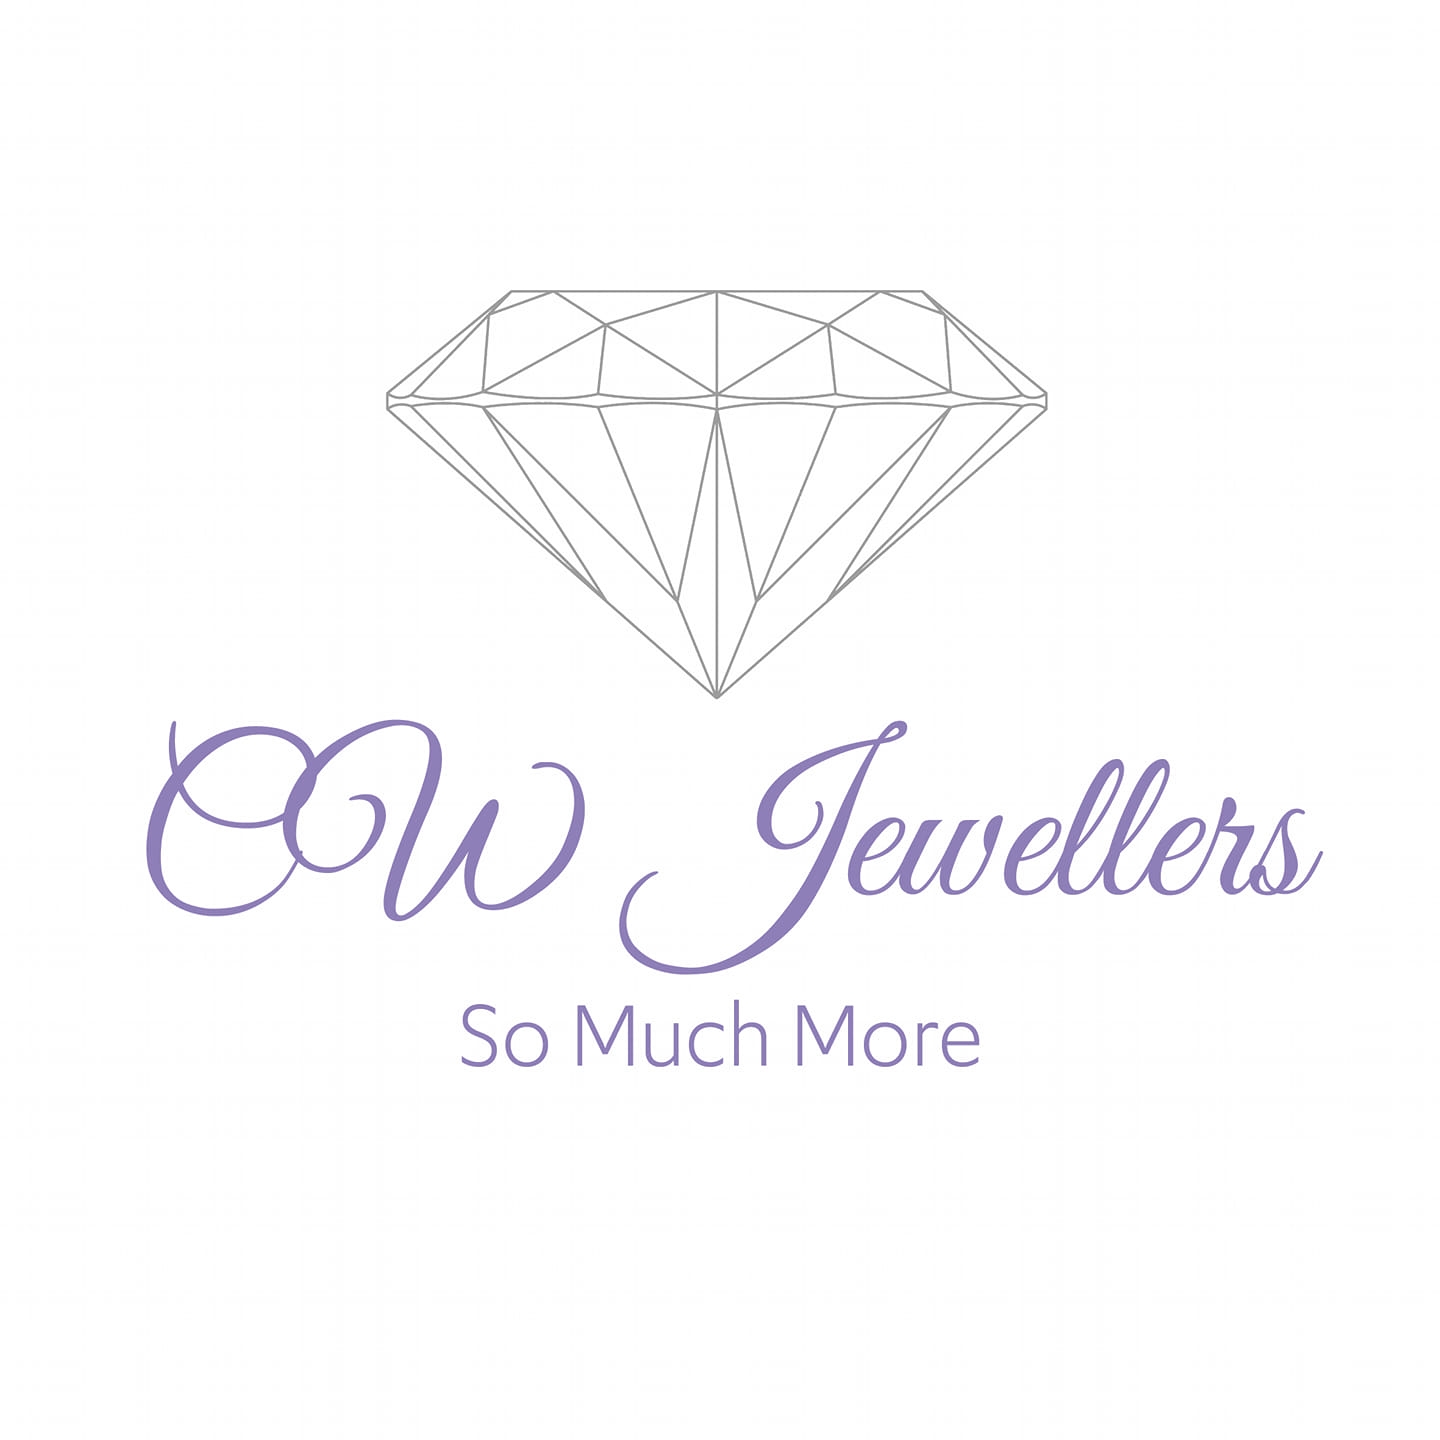 Business logo of CW Jewellers